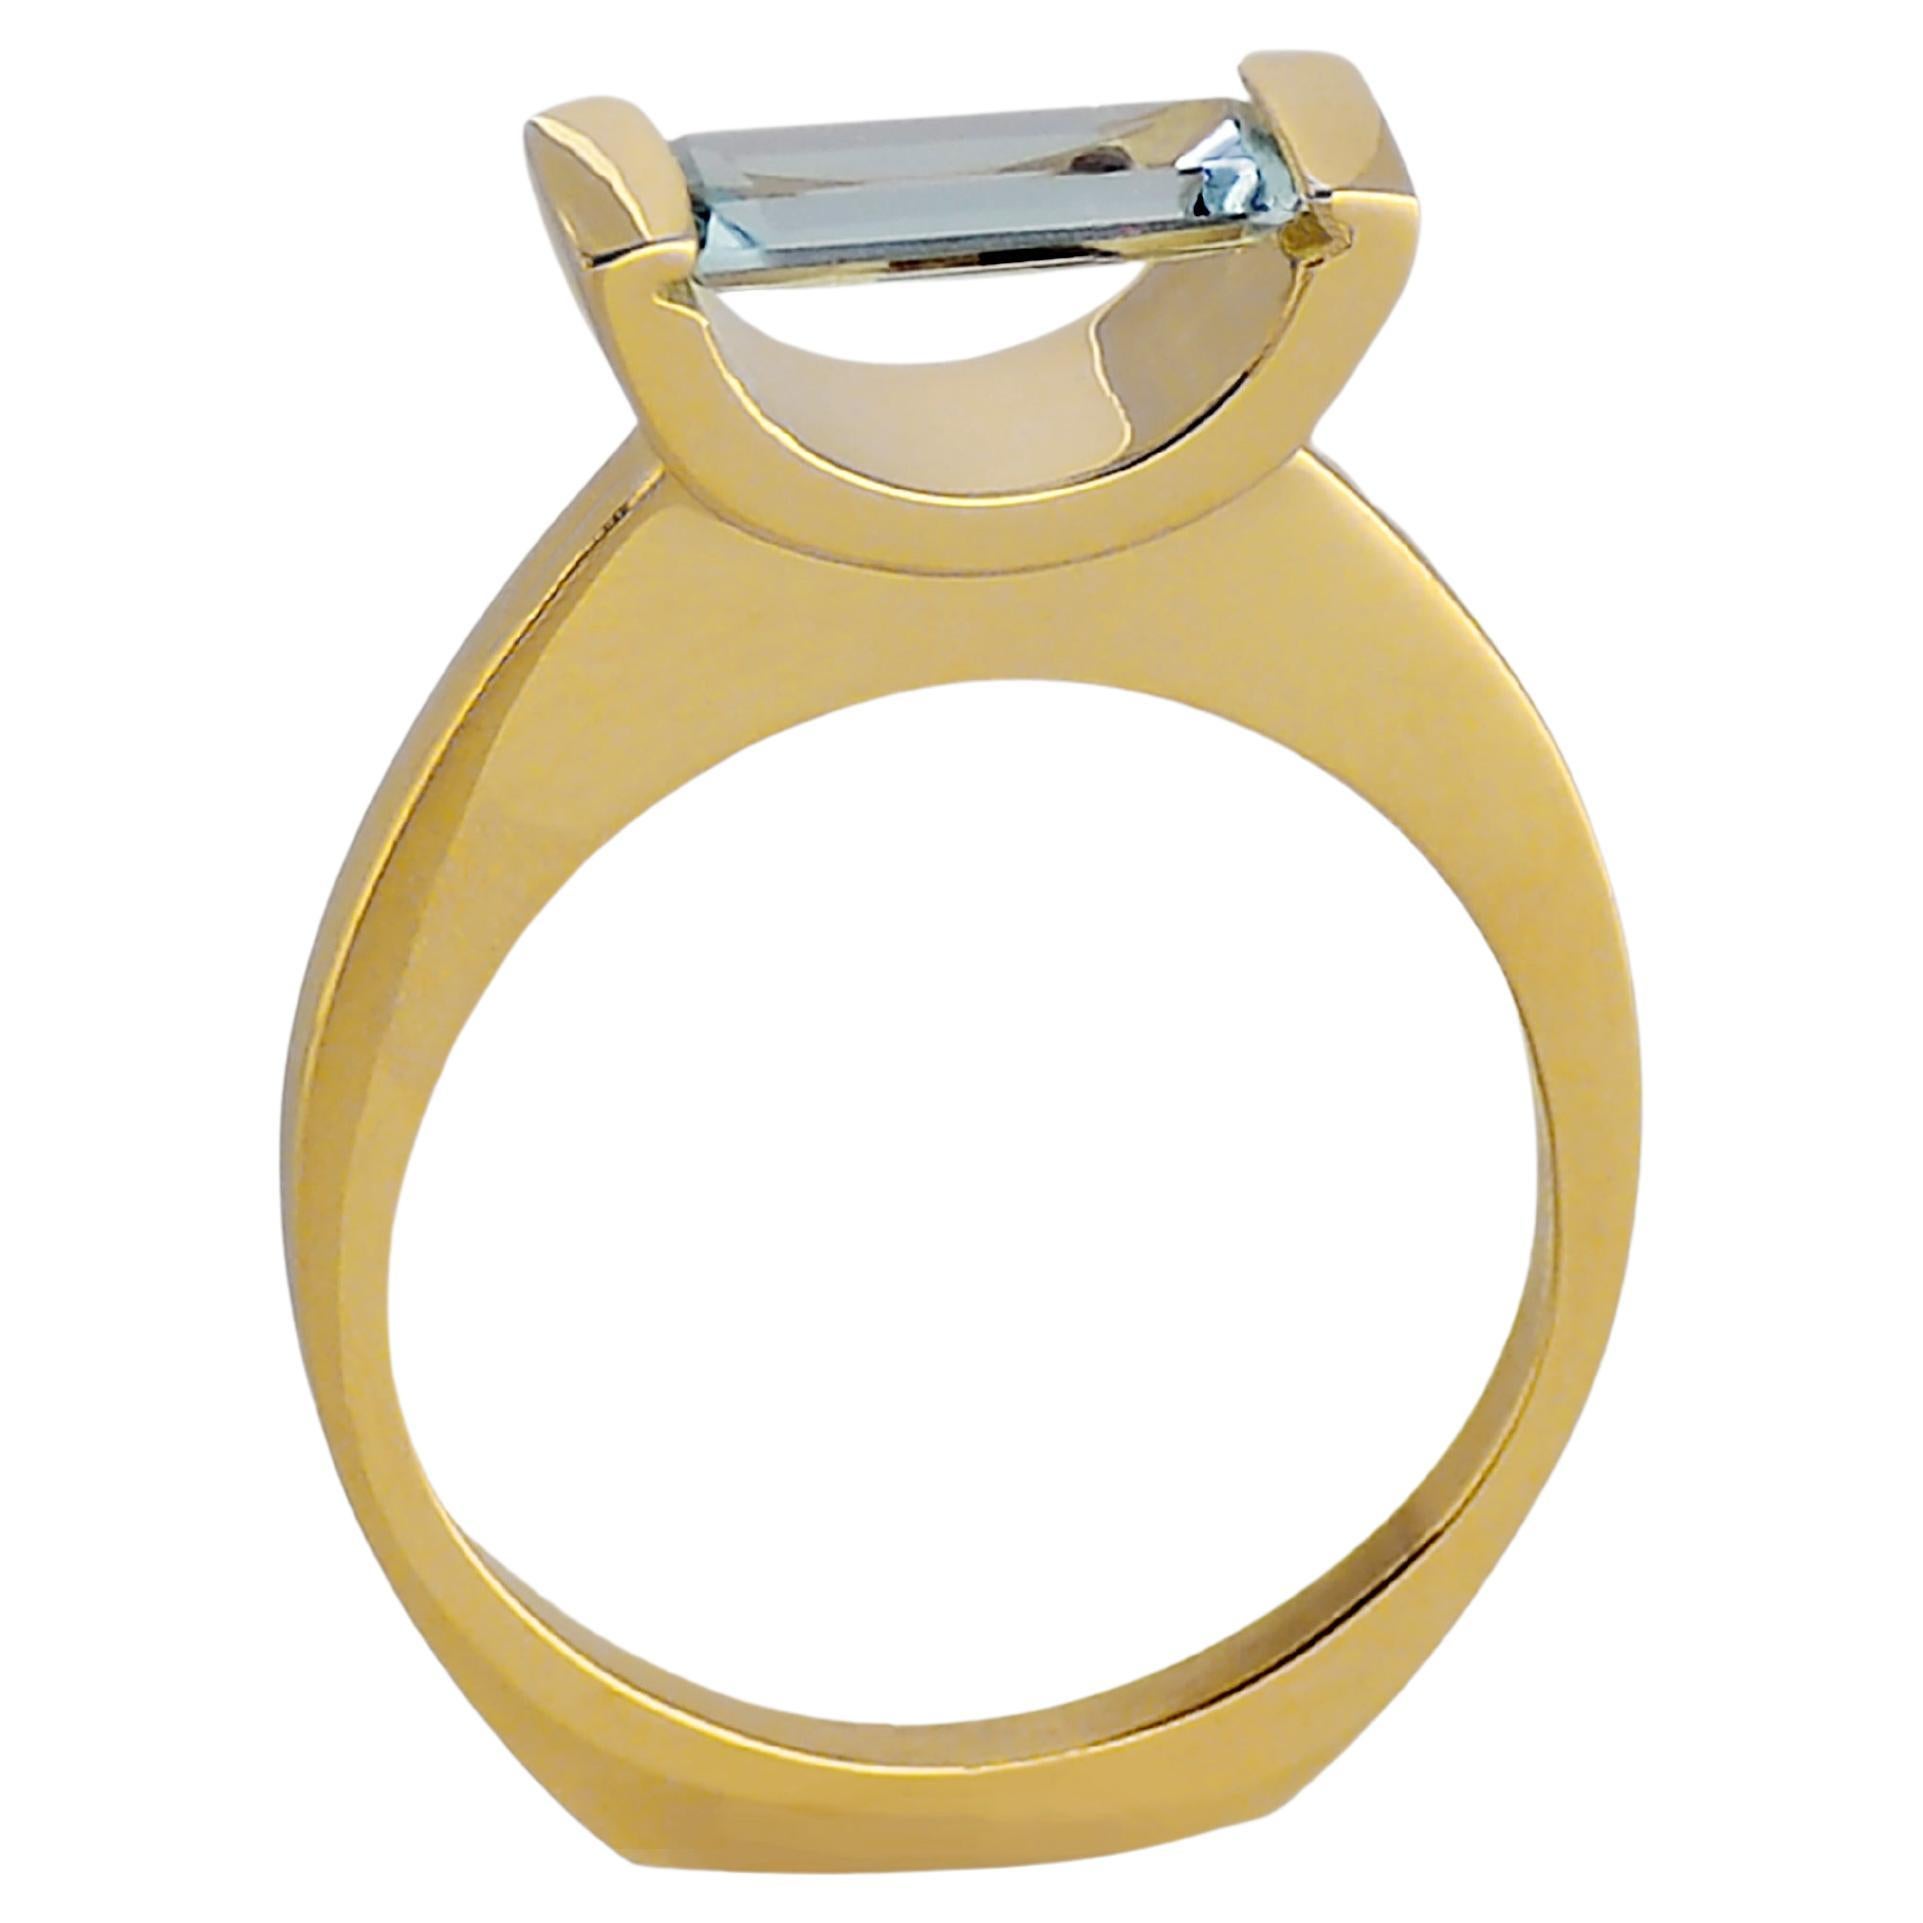 Susan Crow Studio Fairmined Gold and Aquamarine Sliver of Water Ring For Sale